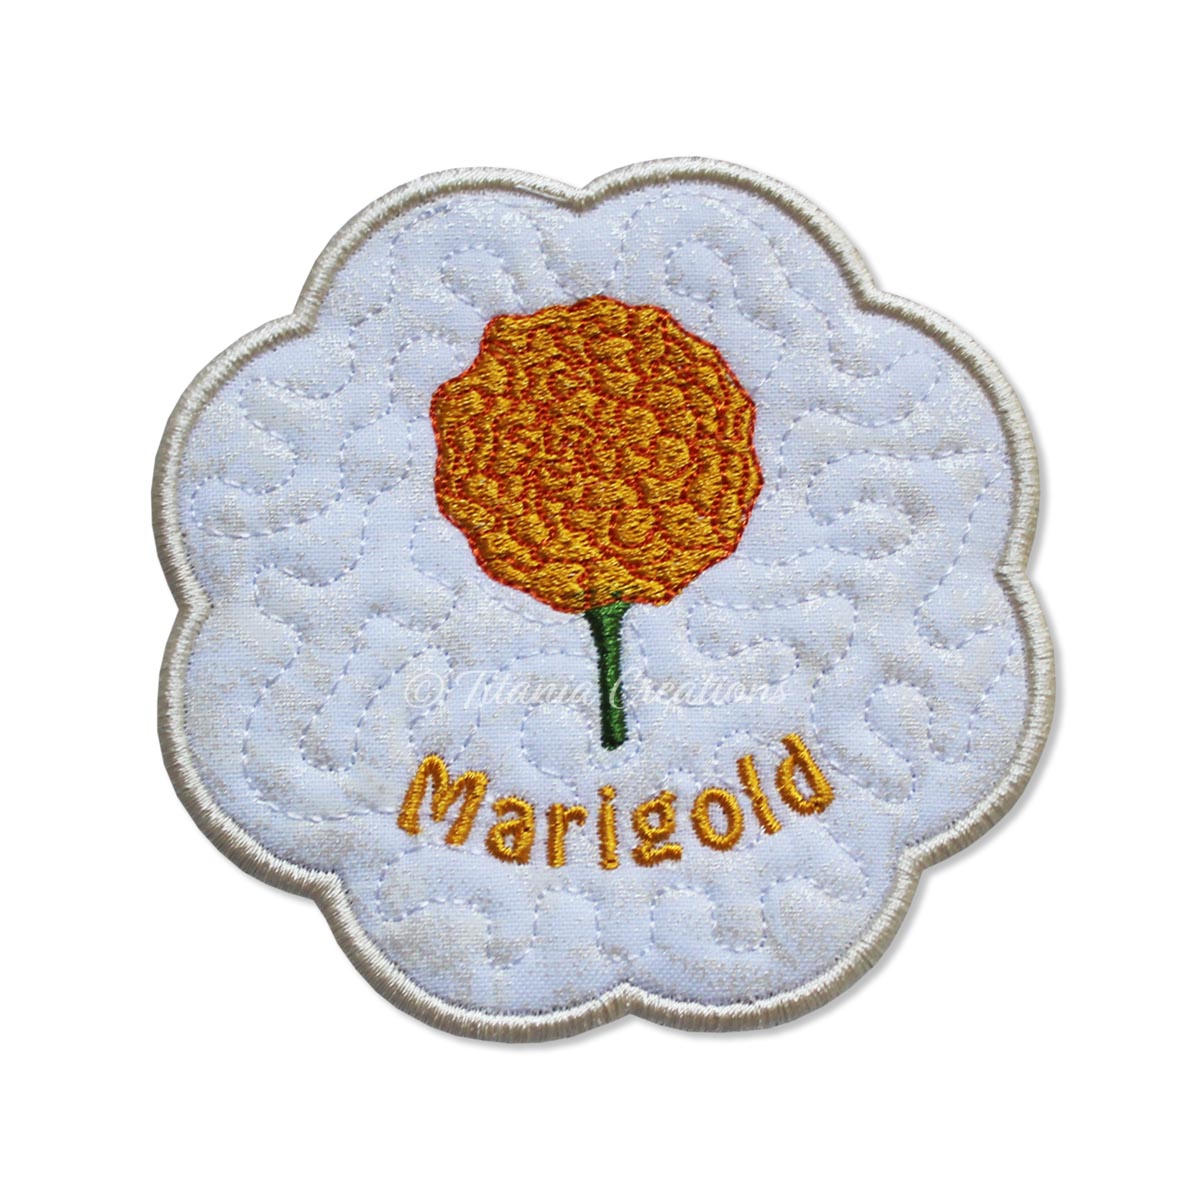 ITH Marigold Flower for October Mat 4x4